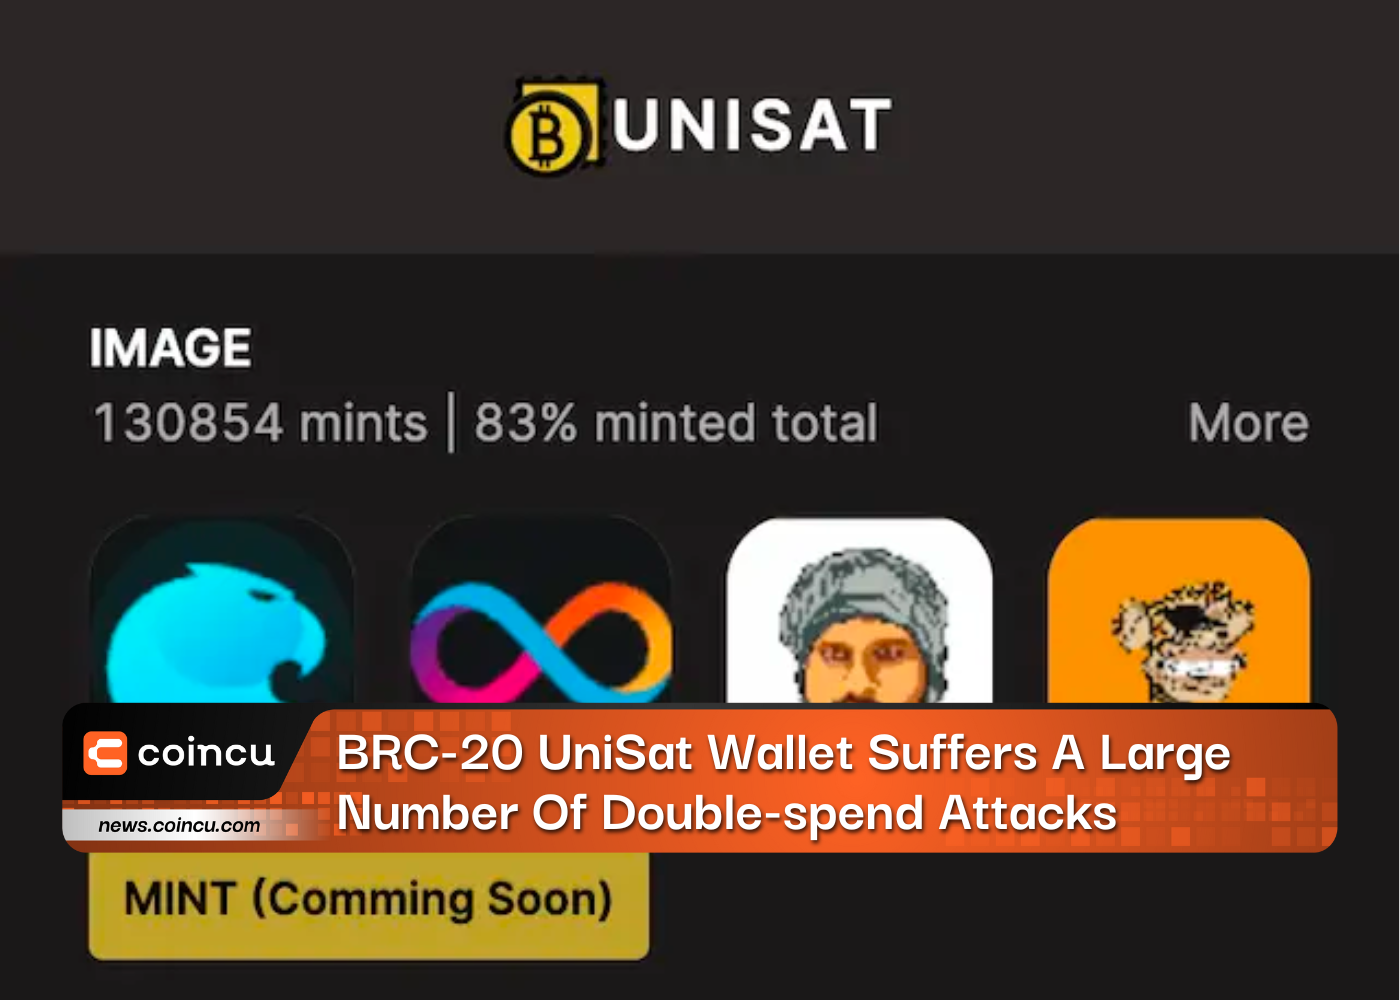 BRC-20 UniSat Wallet Suffers A Large Number Of Double-spend Attacks